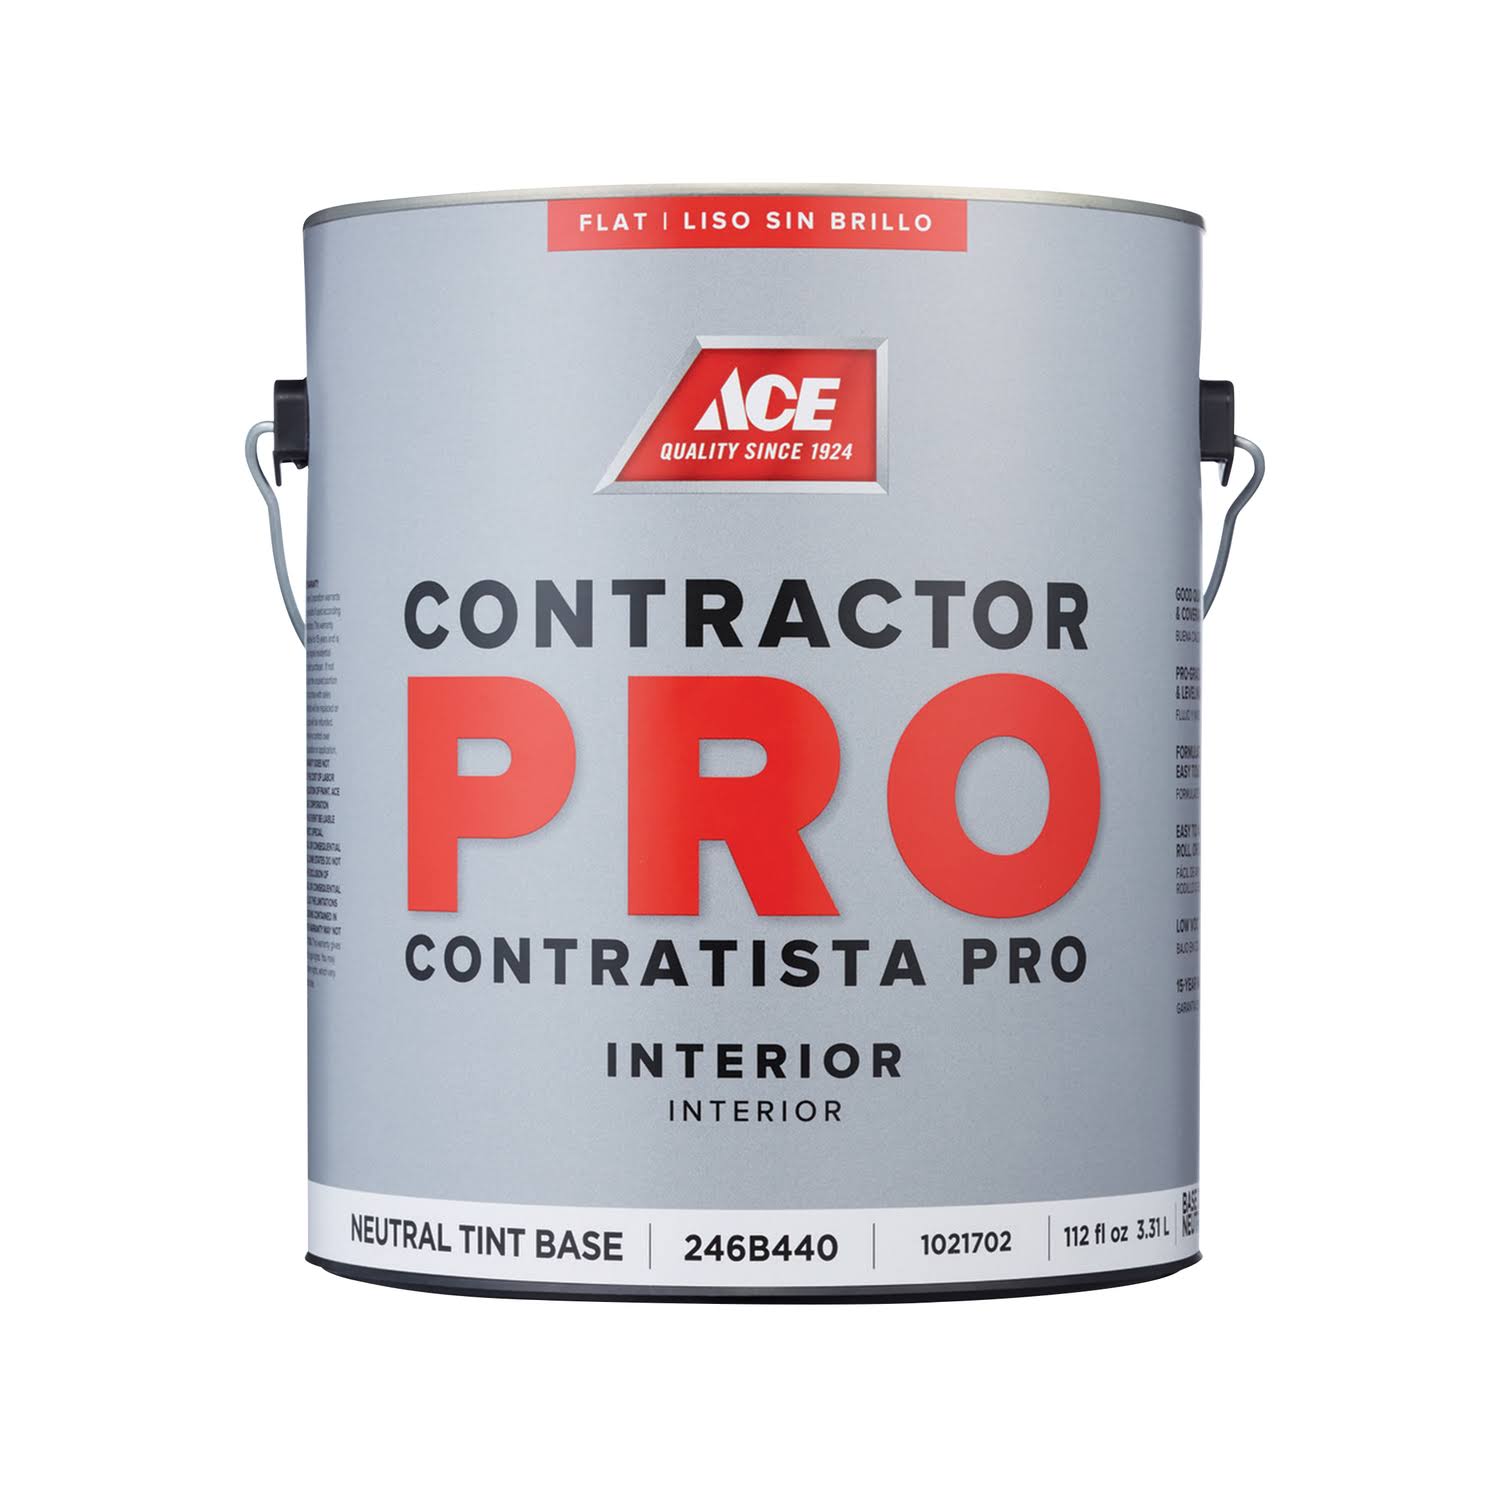 Ace Contractor Pro Flat Tint Base Neutral Base Latex Paint Indoor 1 gal.